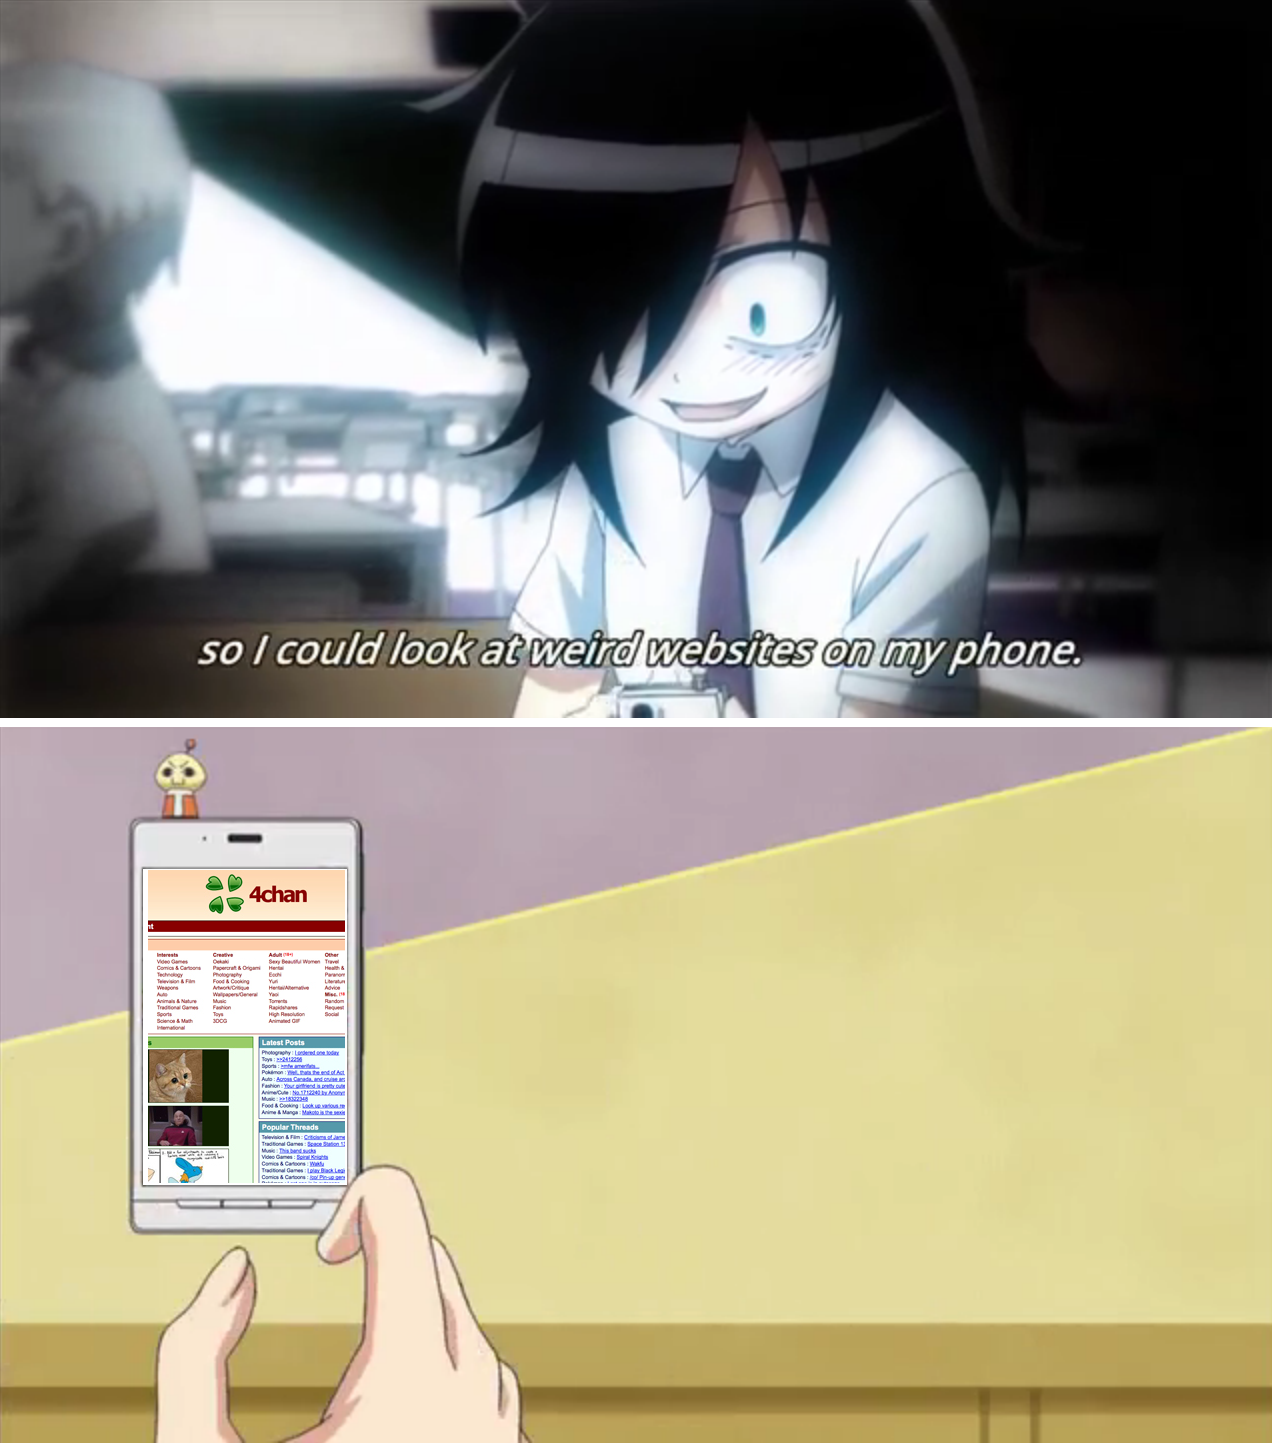 Weird Websites.... Source: Watamote Paint skills off the chart.. Her face after browsing a few minutes.